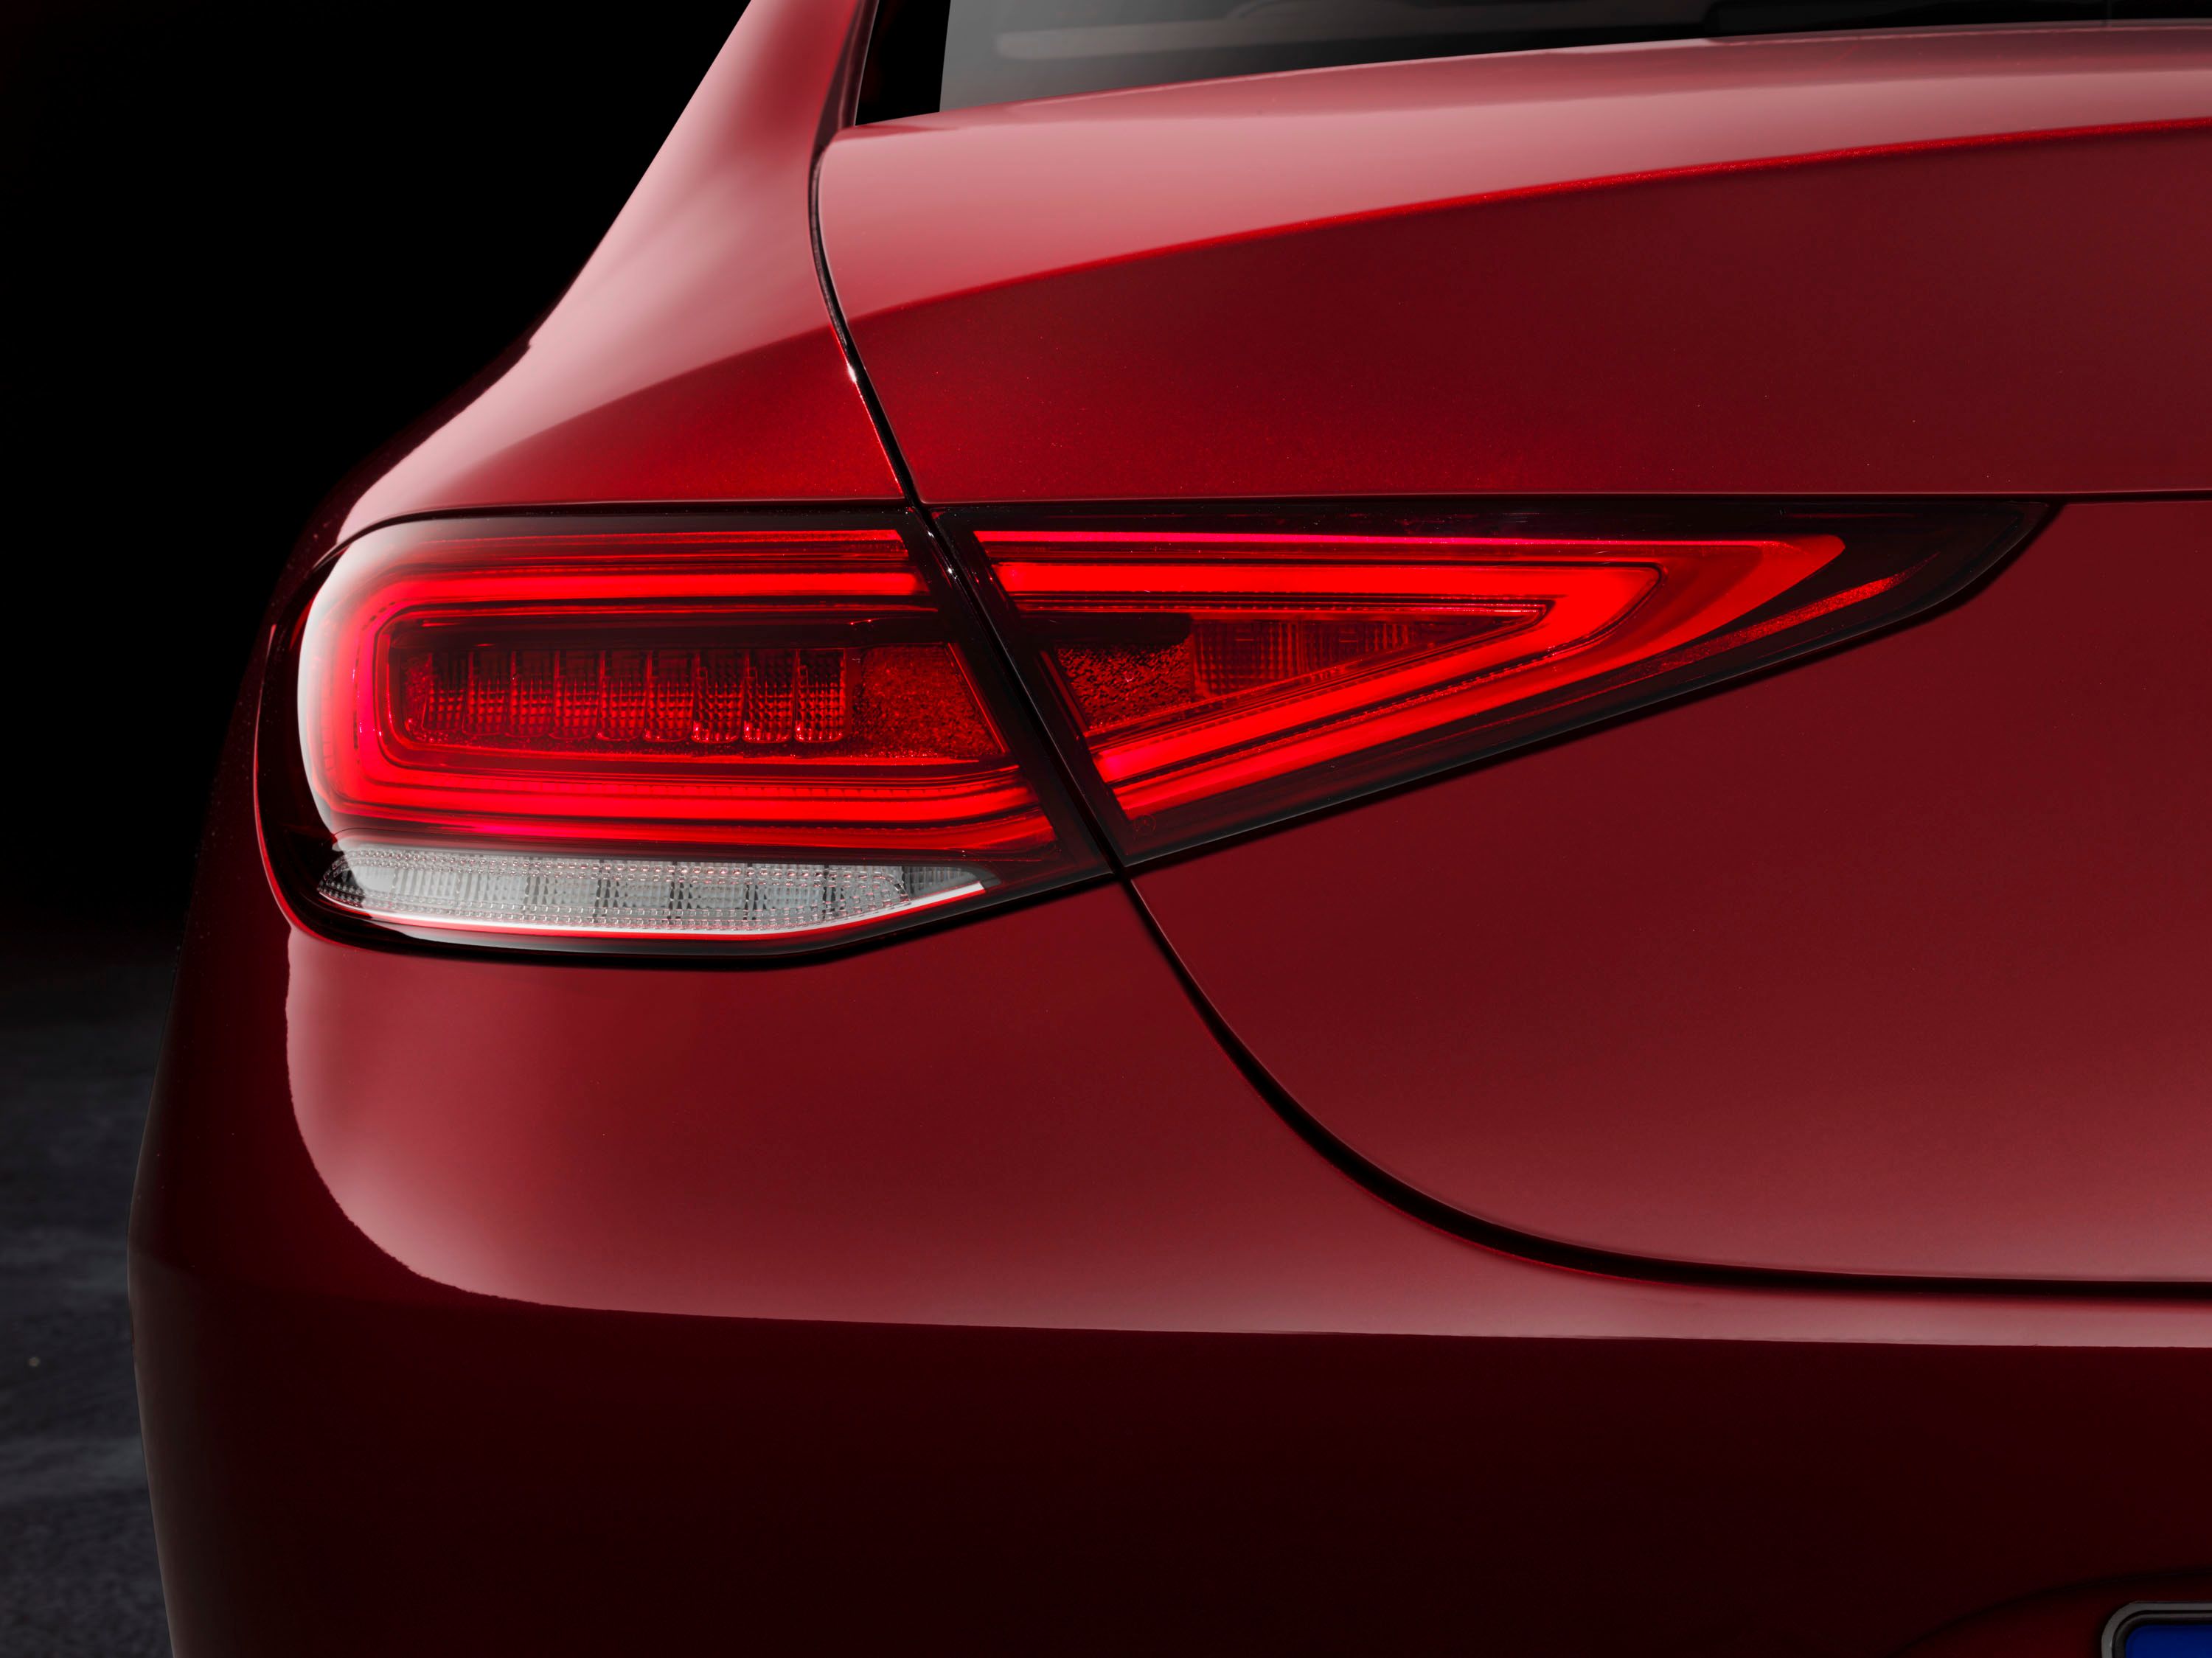 Two-section taillights